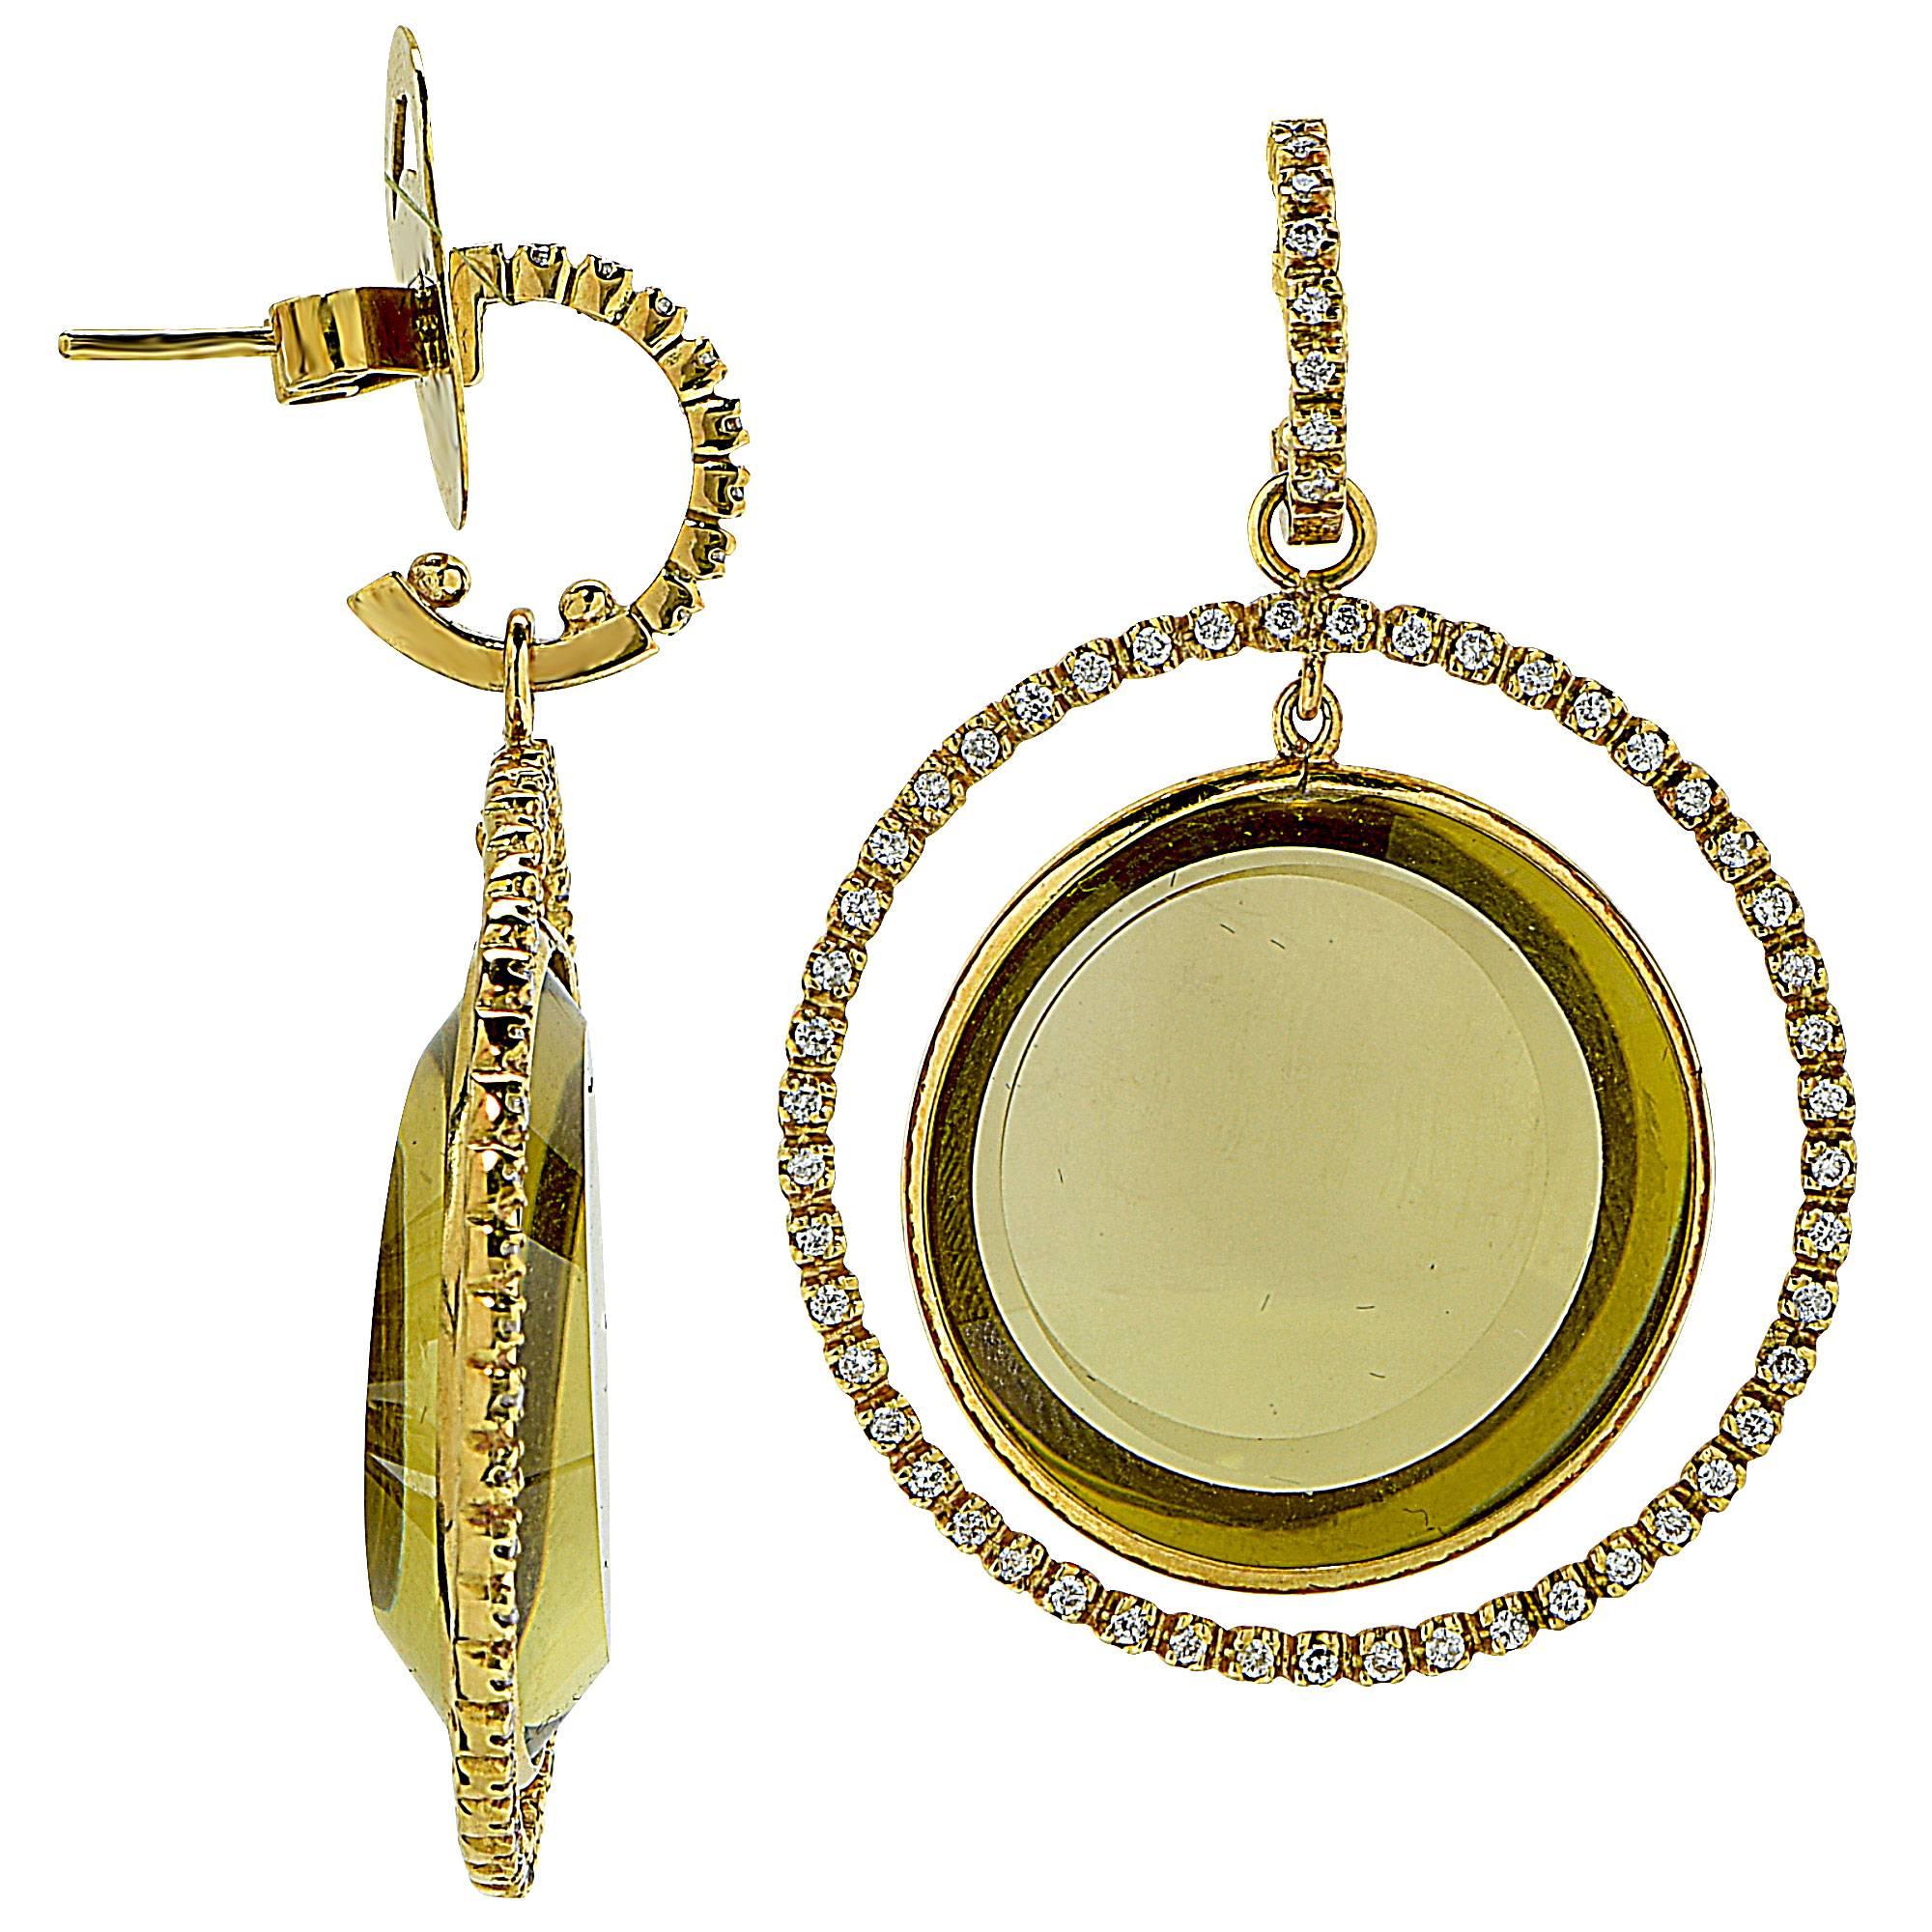 18k yellow gold earrings featuring green quartz accented by 114 round brilliant cut diamonds weighing approximately 1.14cts total, G color SI clarity.

They are stamped and tested as 18k gold.
The metal weight is 20.68 grams.
They measure 1.85